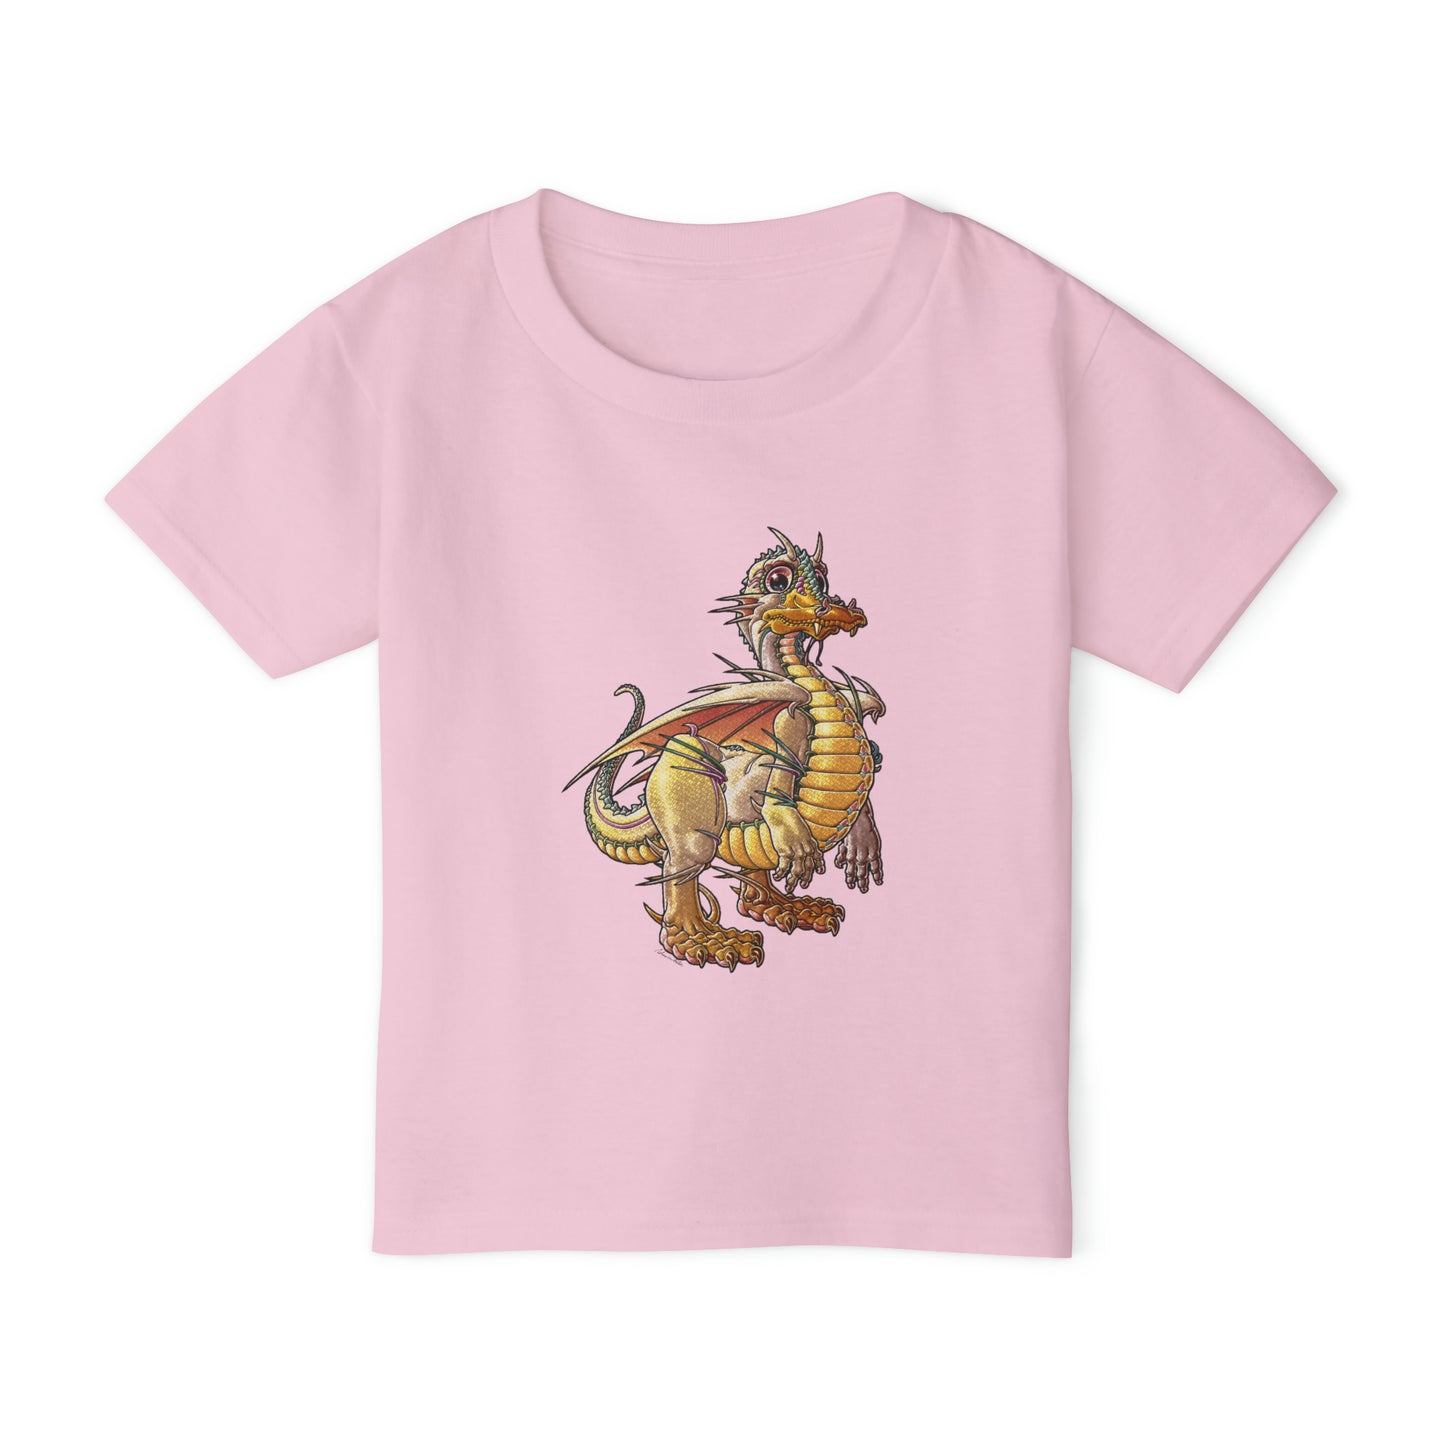 Heavy Cotton™ Toddler T-shirt (AUGLEY)